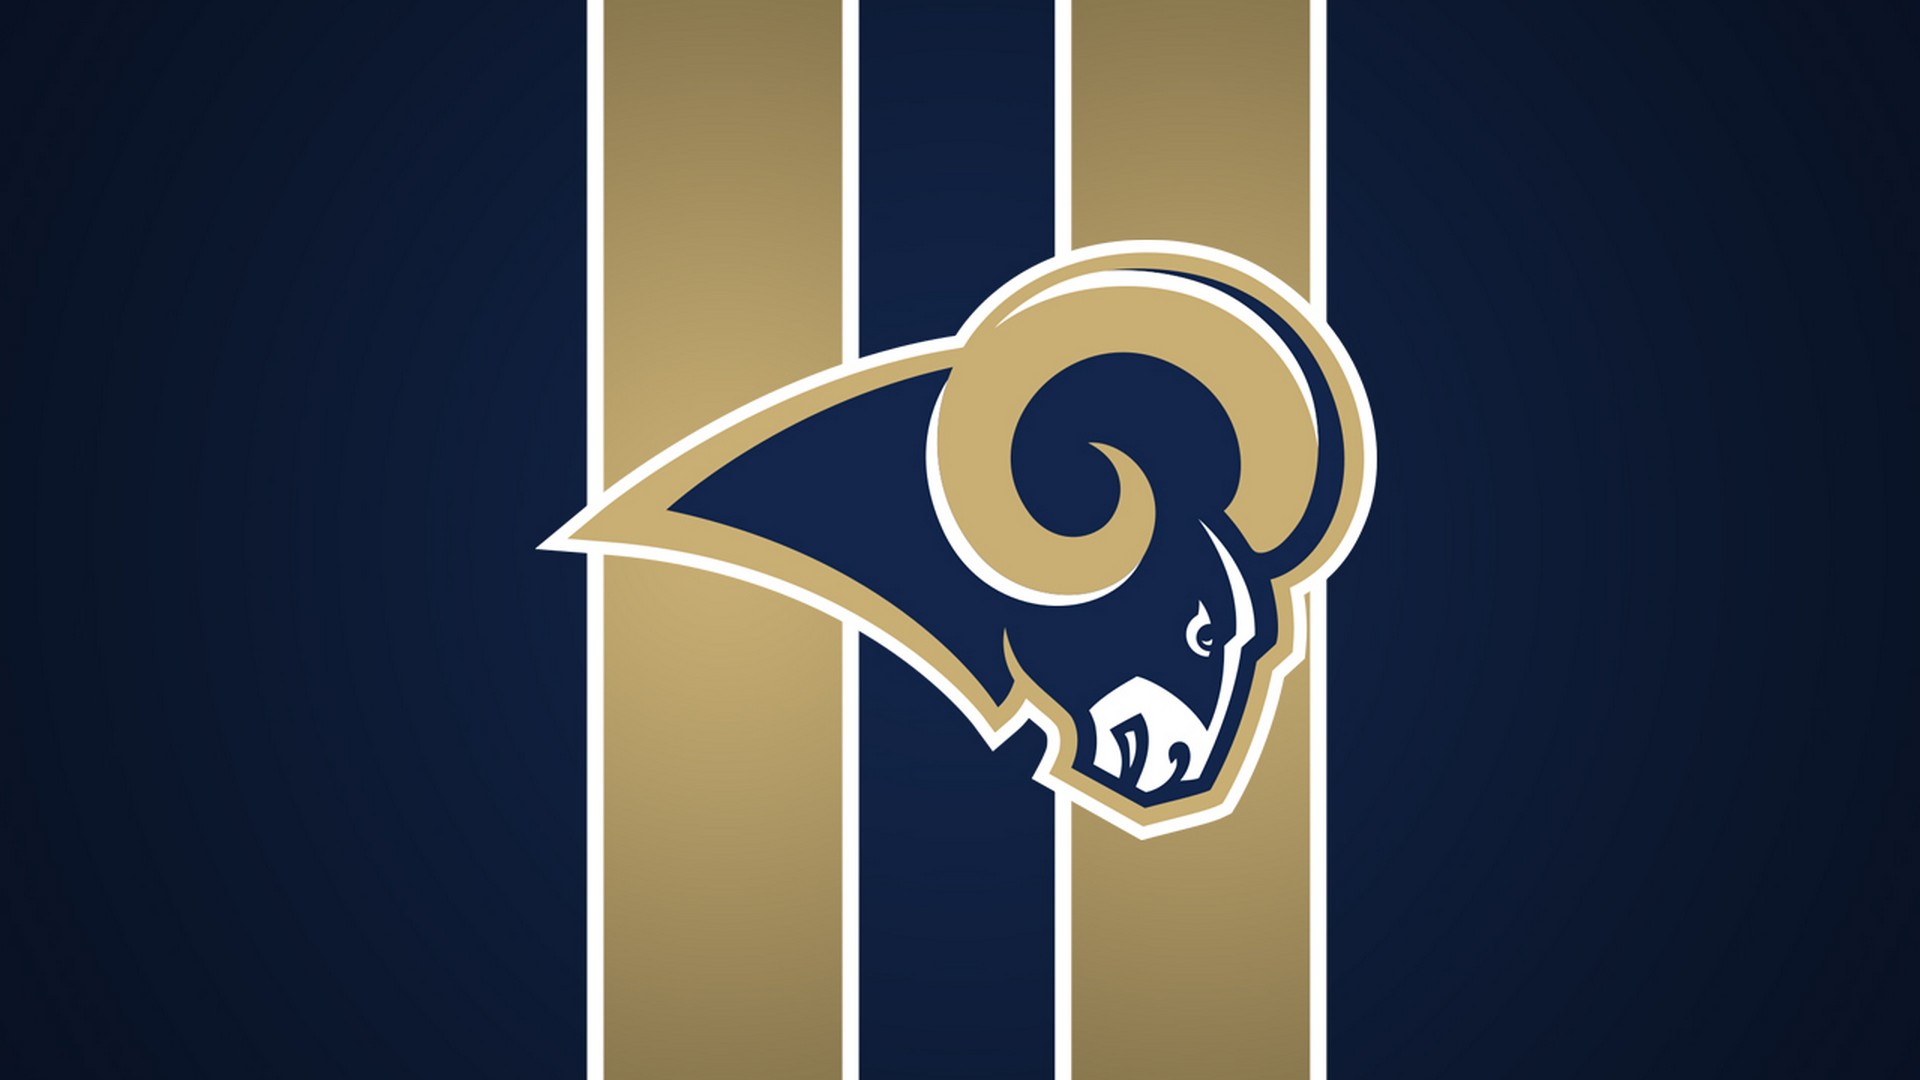 Los Angeles Rams For Mac With Resolution 1920X1080 pixel. You can make this wallpaper for your Mac or Windows Desktop Background, iPhone, Android or Tablet and another Smartphone device for free